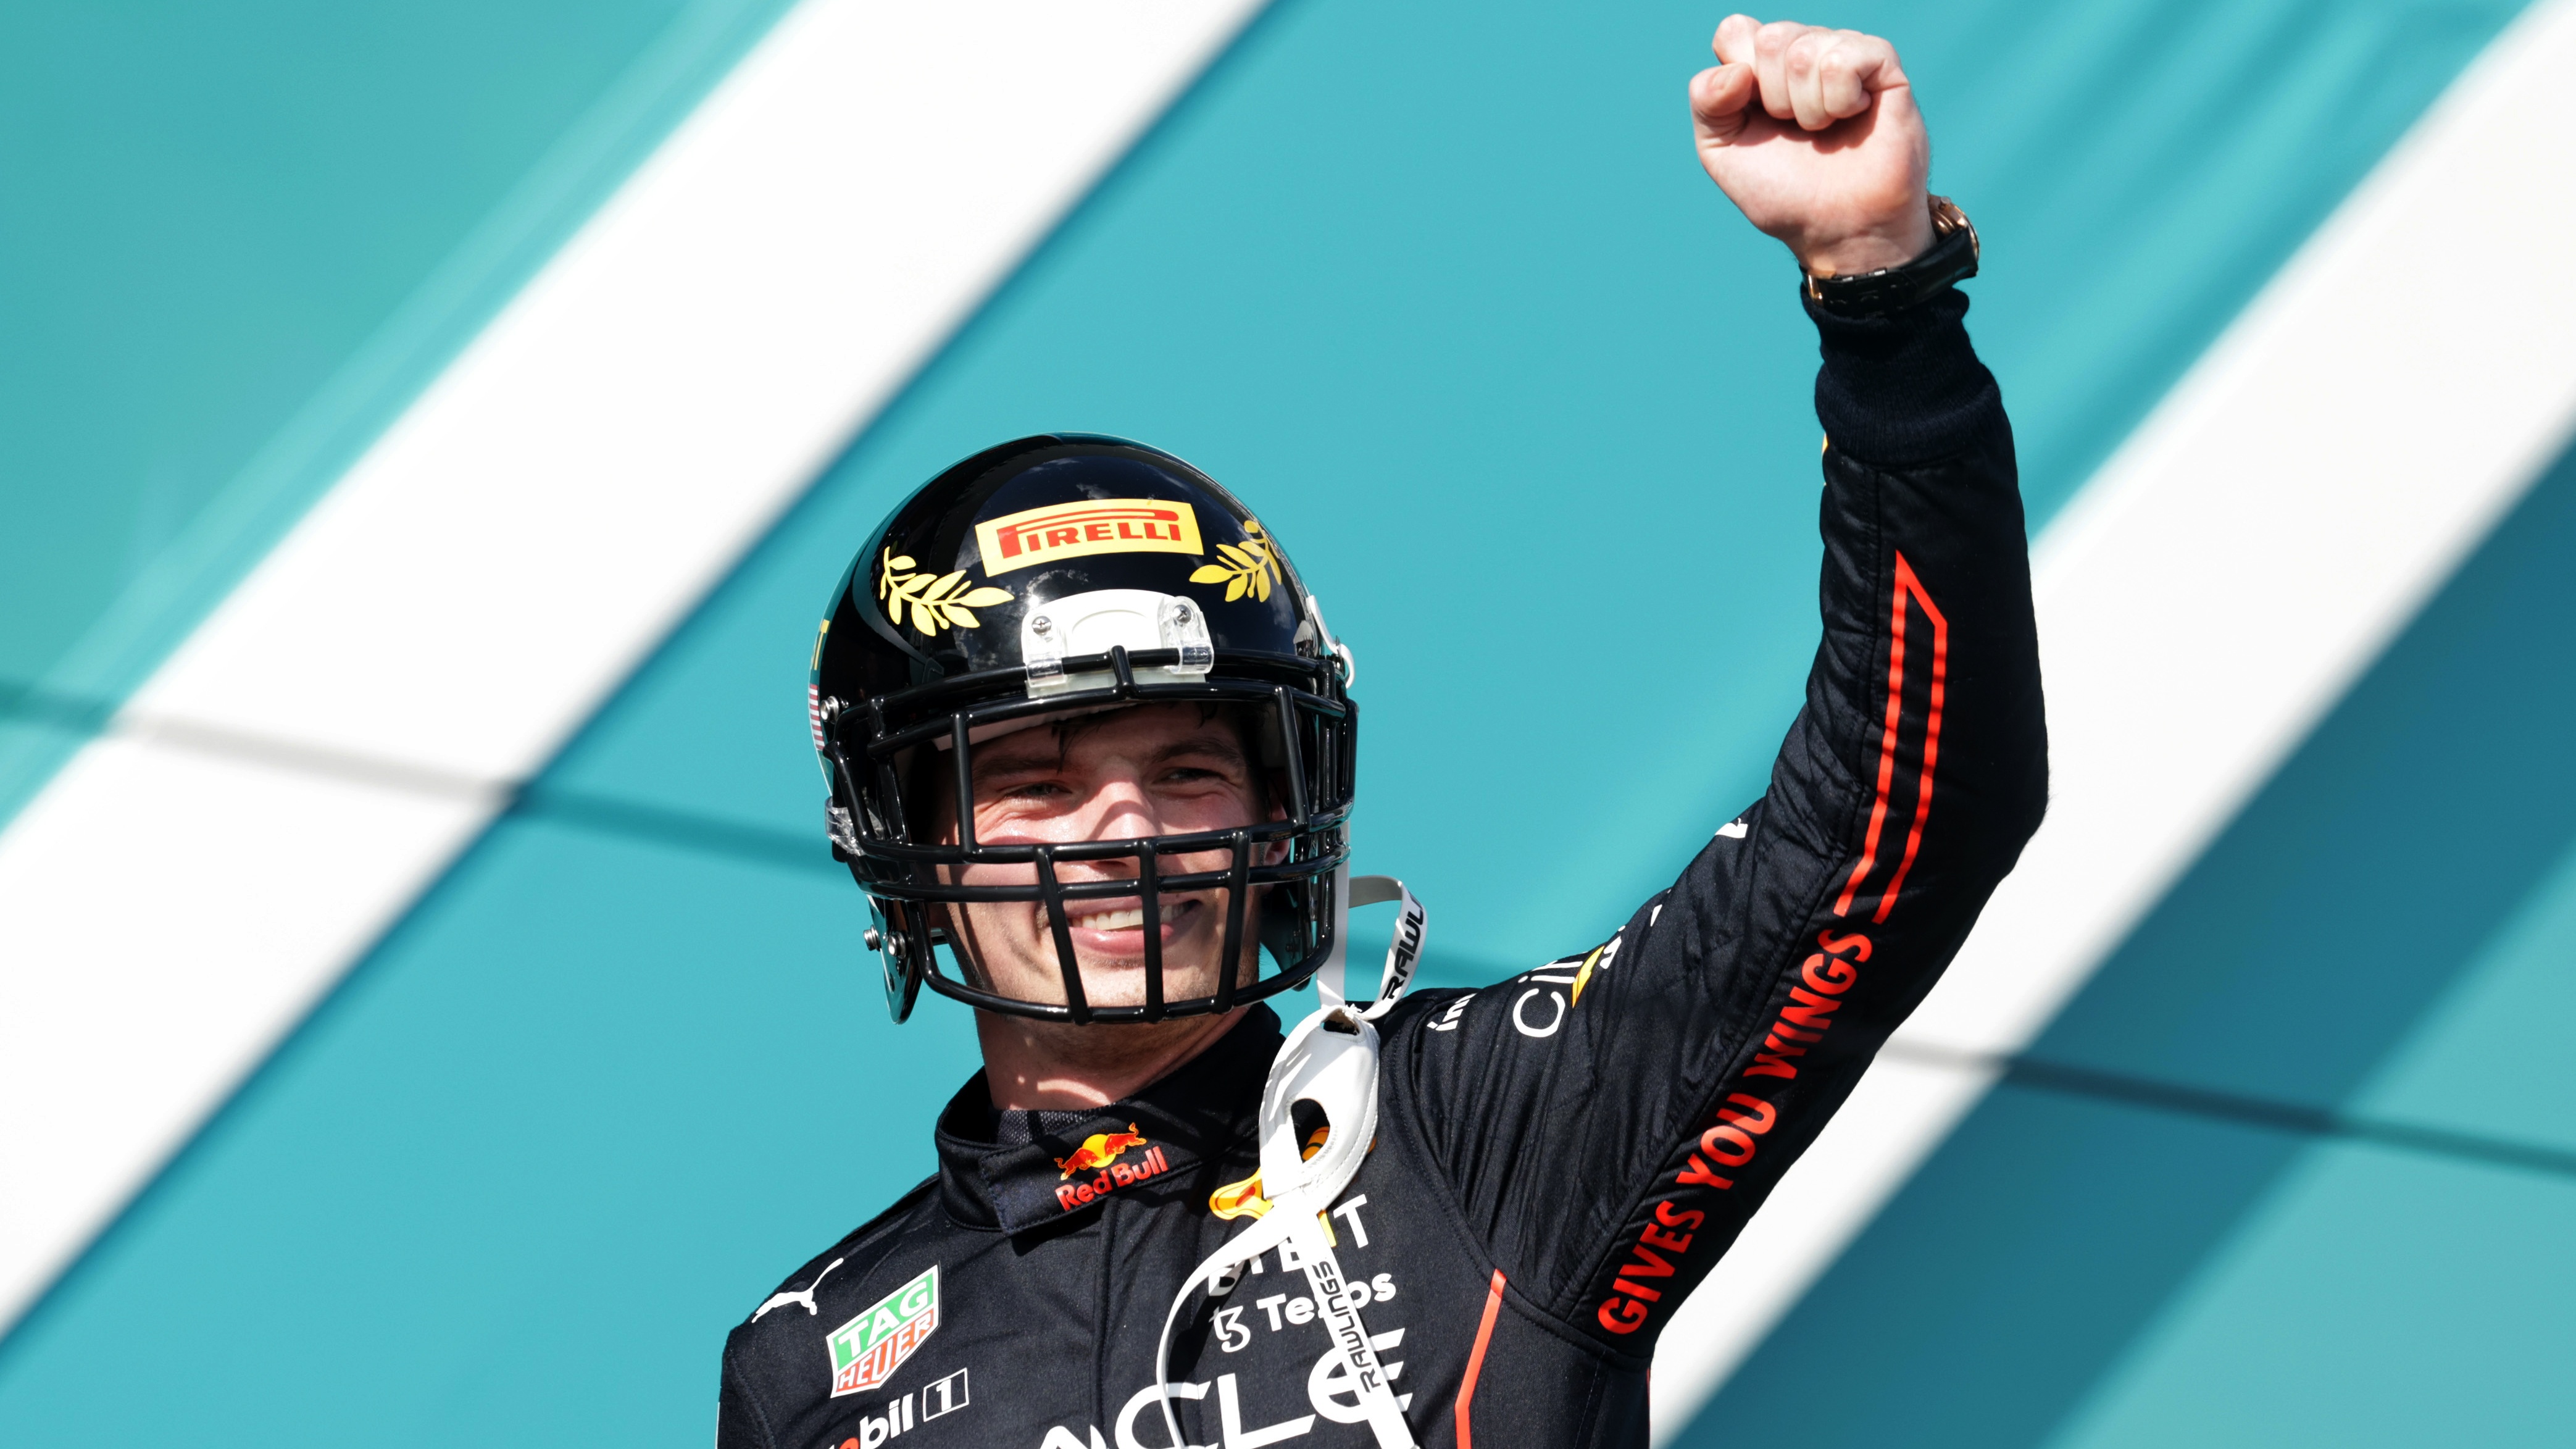 Miami Grand Prix live stream how to watch the F1 free online and on TV